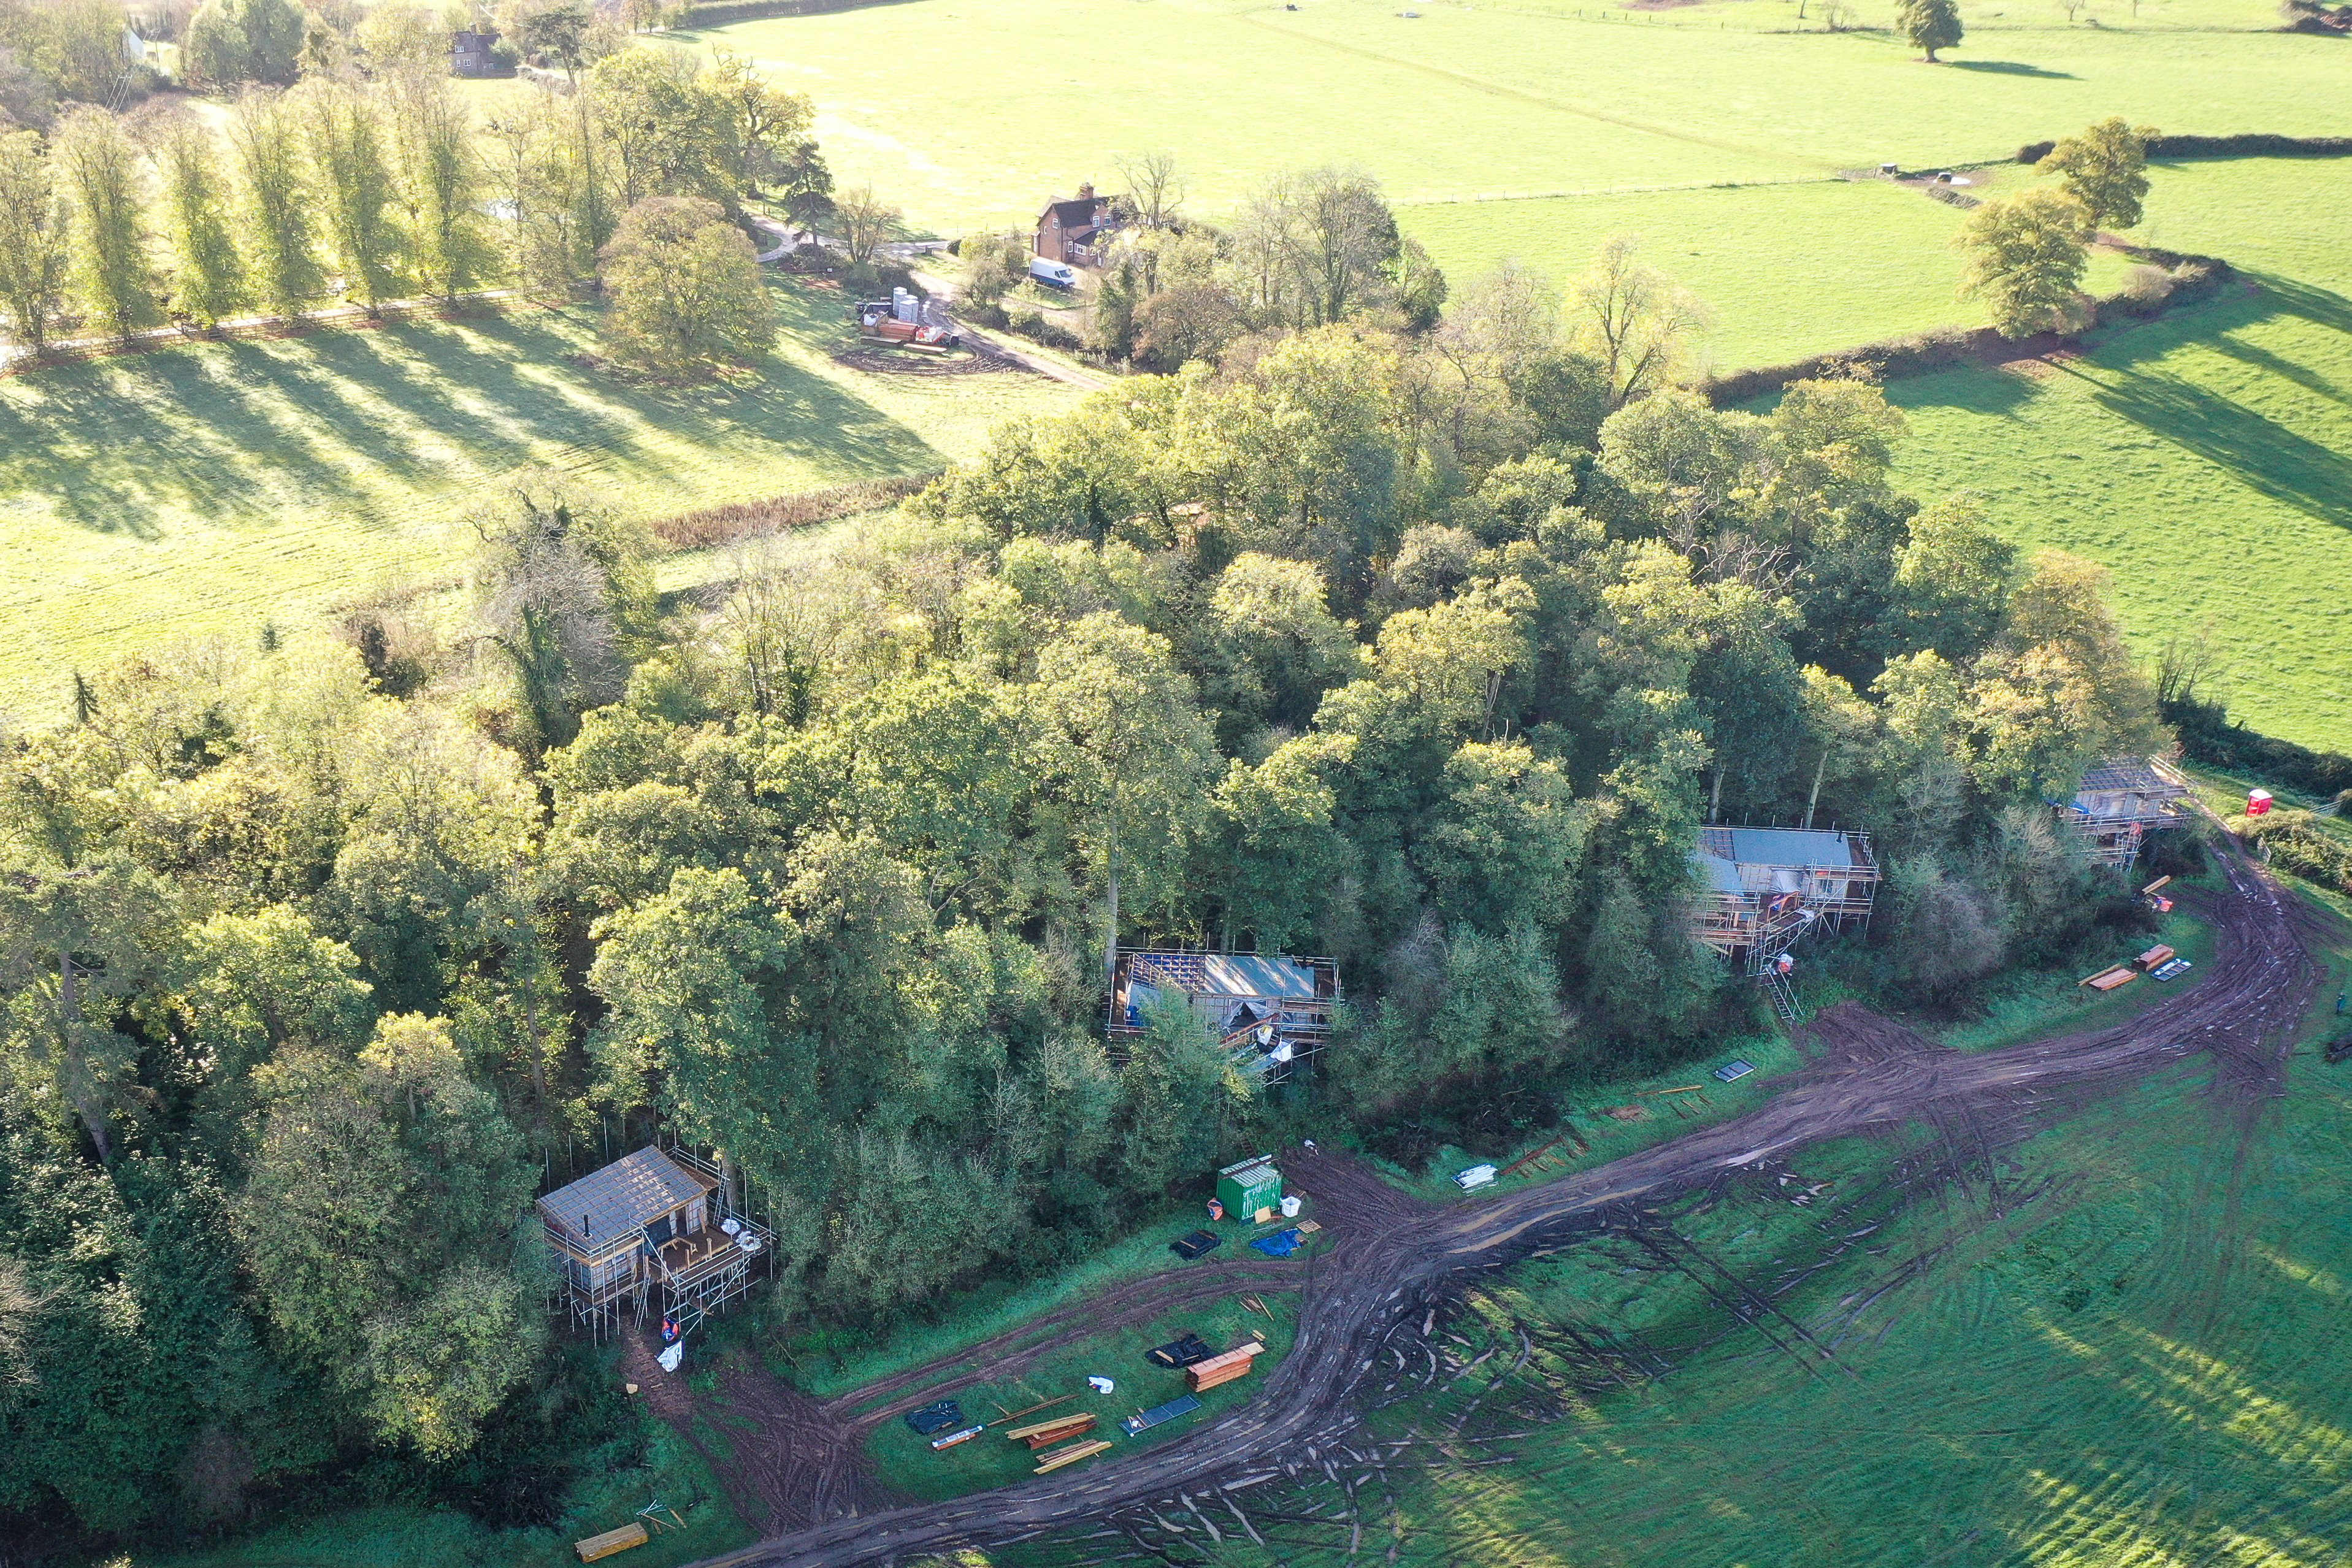 Aerial view of treehouses being built in woodland on the elmore court estate overlooking their rewilding project in the UK